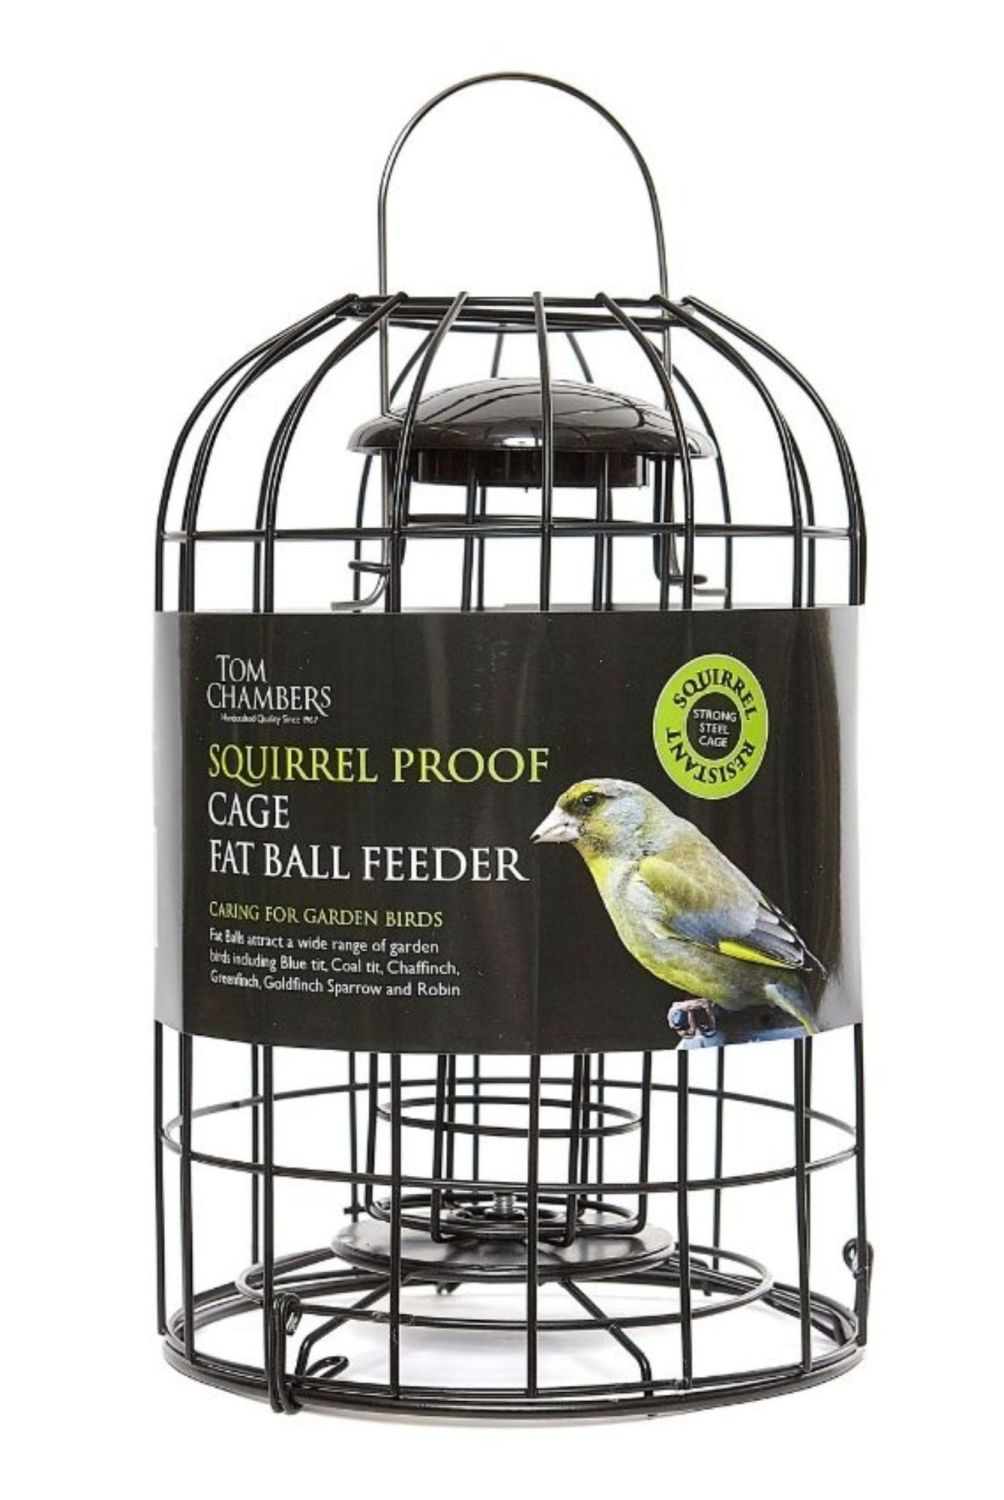 SQUIRREL PROOF/CAGE FAT BALL FEEDER